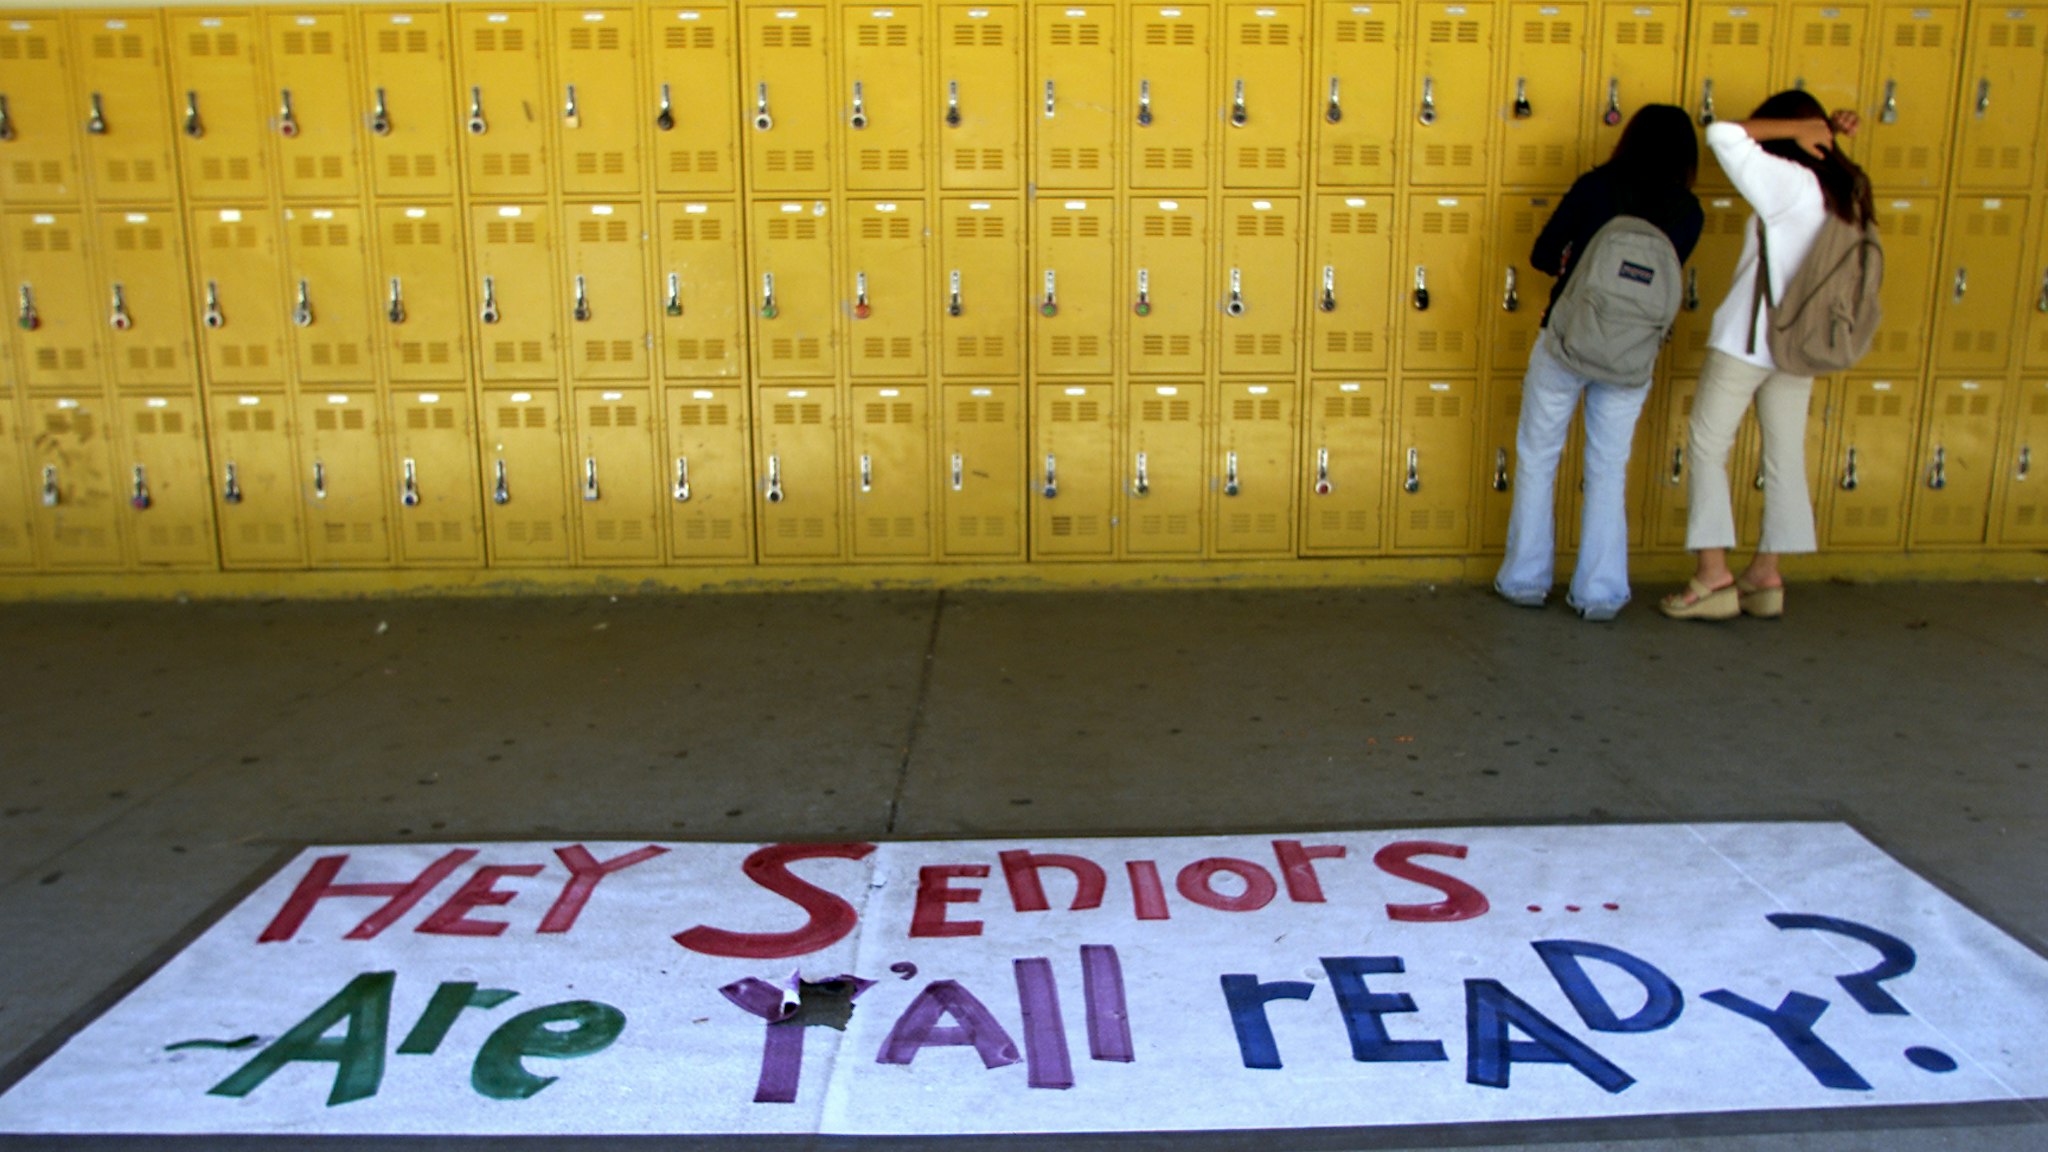 Students returning to classes at Sunny Hills High in Fullerton found their lockers painted with a fresh coat of bright yellow paint courtesy of the PTA. (Photo by Mark Boster/Los Angeles Times via Getty Images)